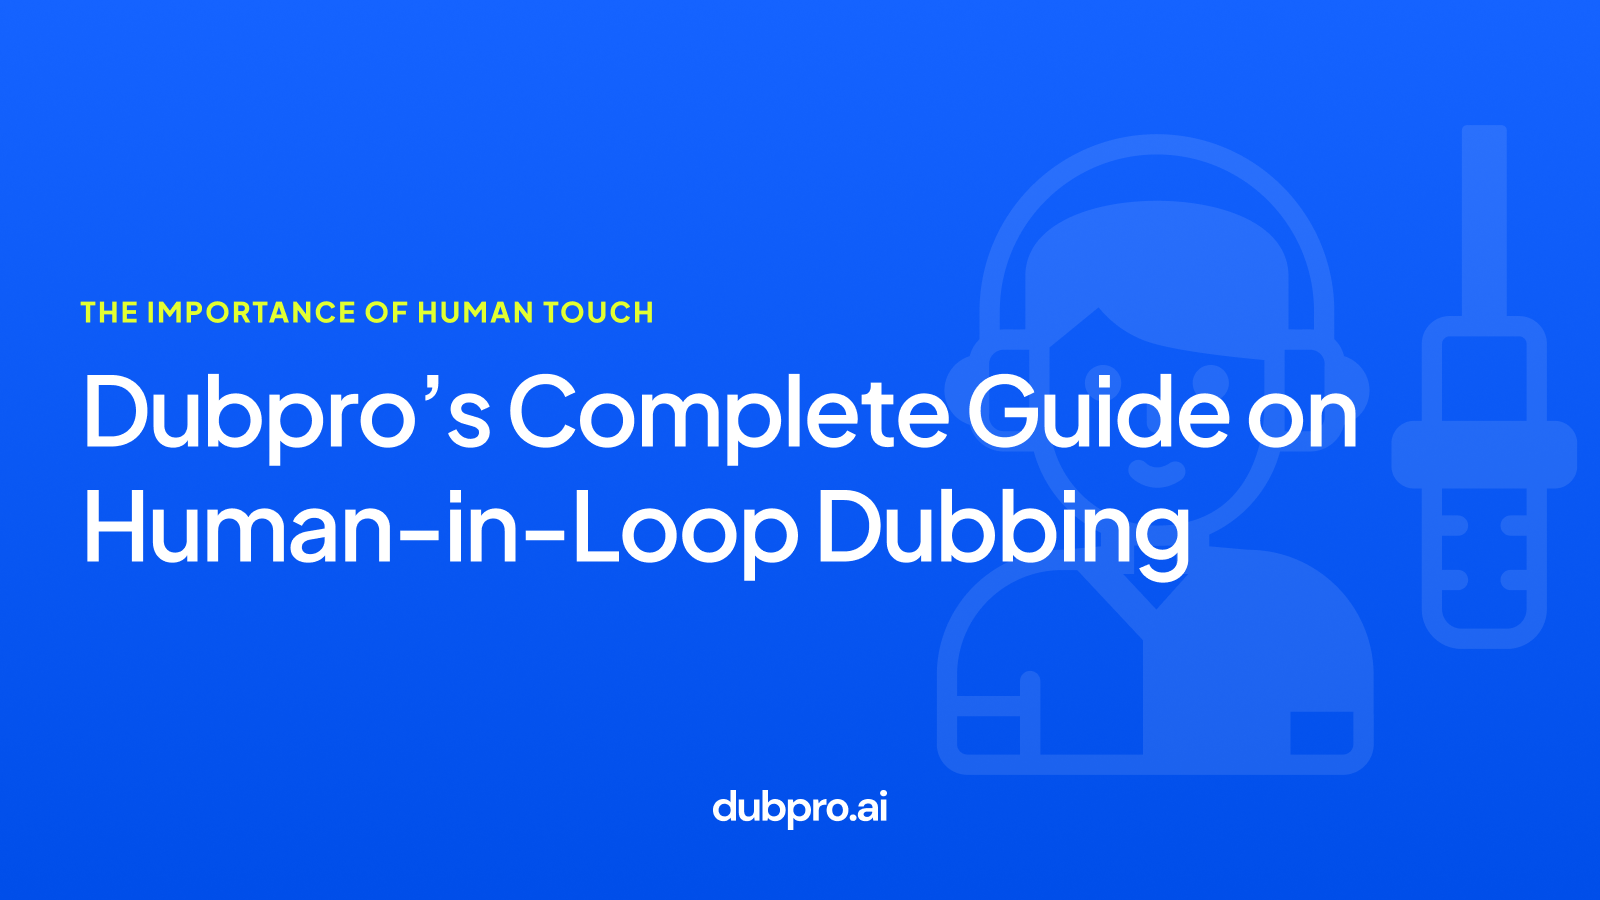 Dubpro’s Complete Guide on Human-in-Loop Dubbing